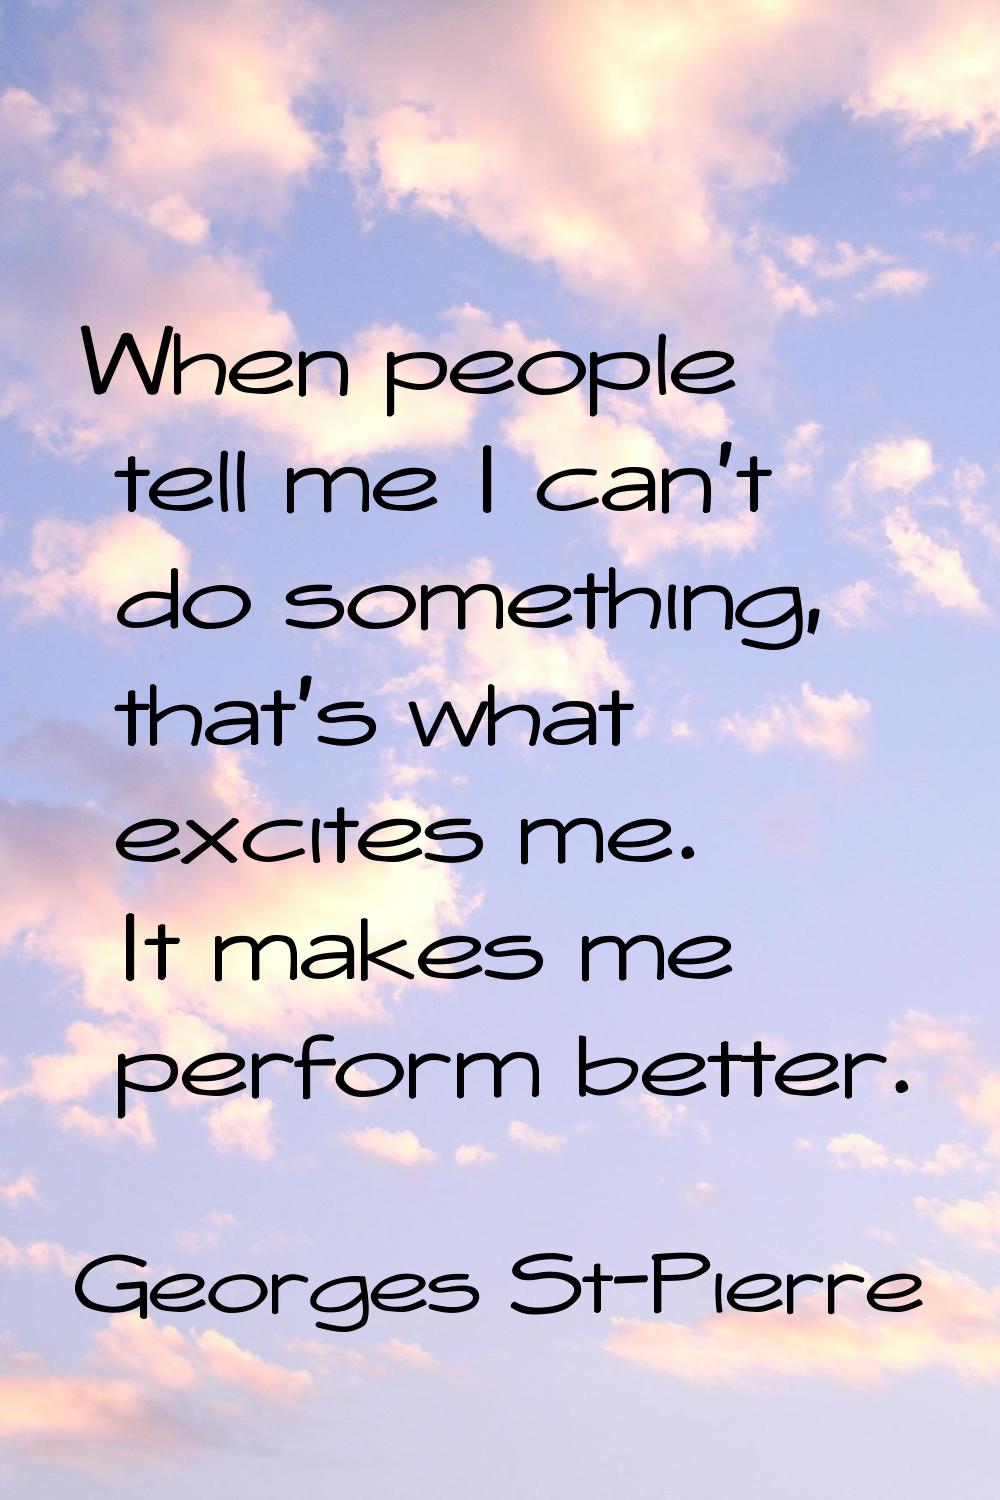 When people tell me I can't do something, that's what excites me. It makes me perform better.